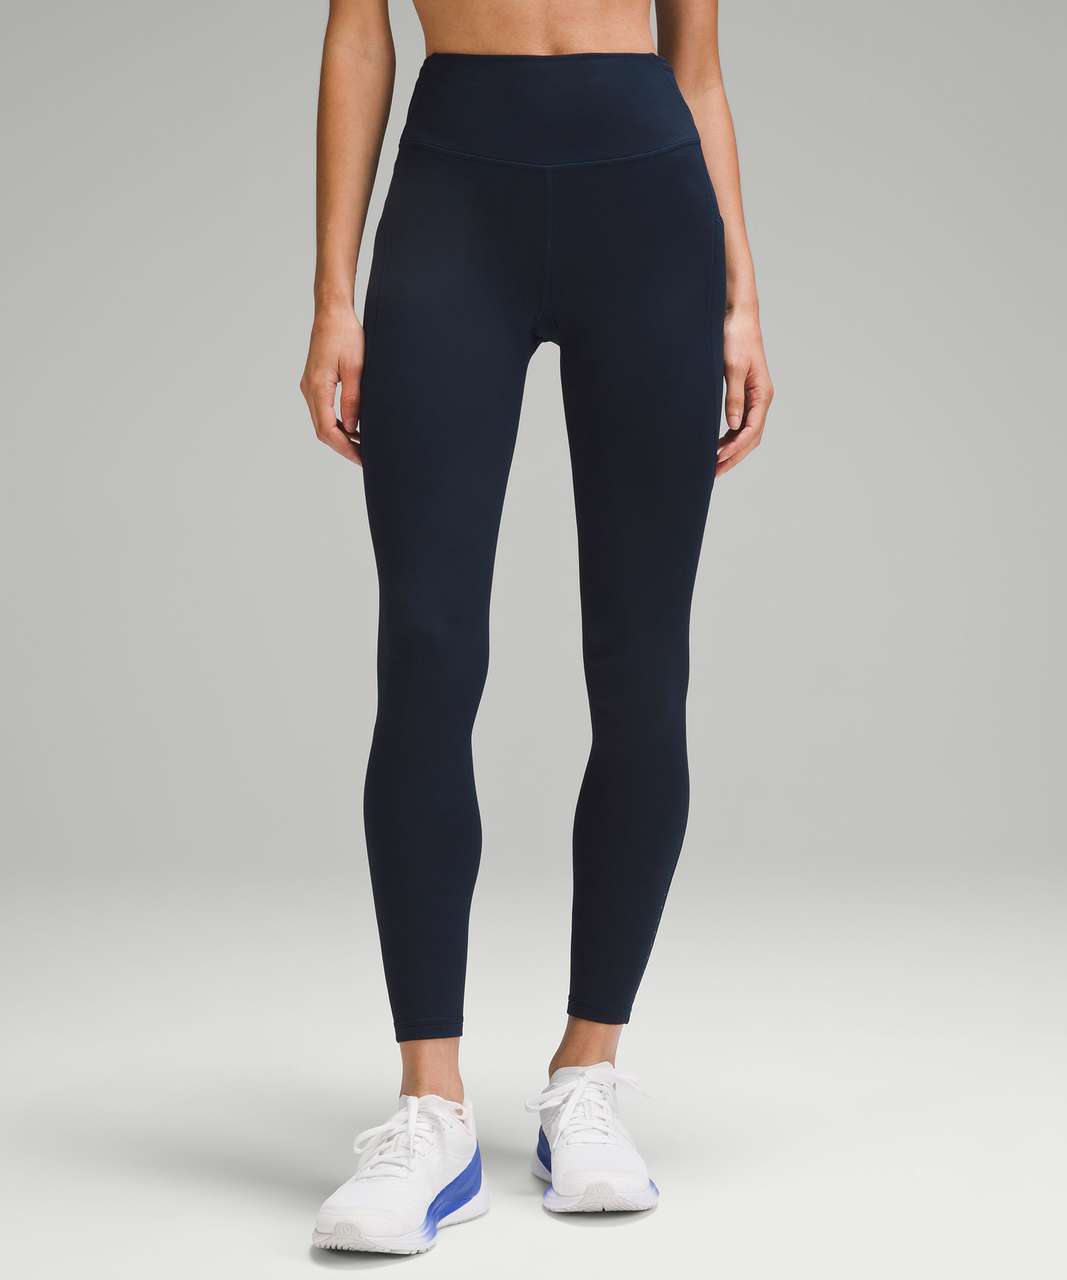 Lululemon Fast and Free High-Rise Fleece Tight 28" *Pockets - True Navy